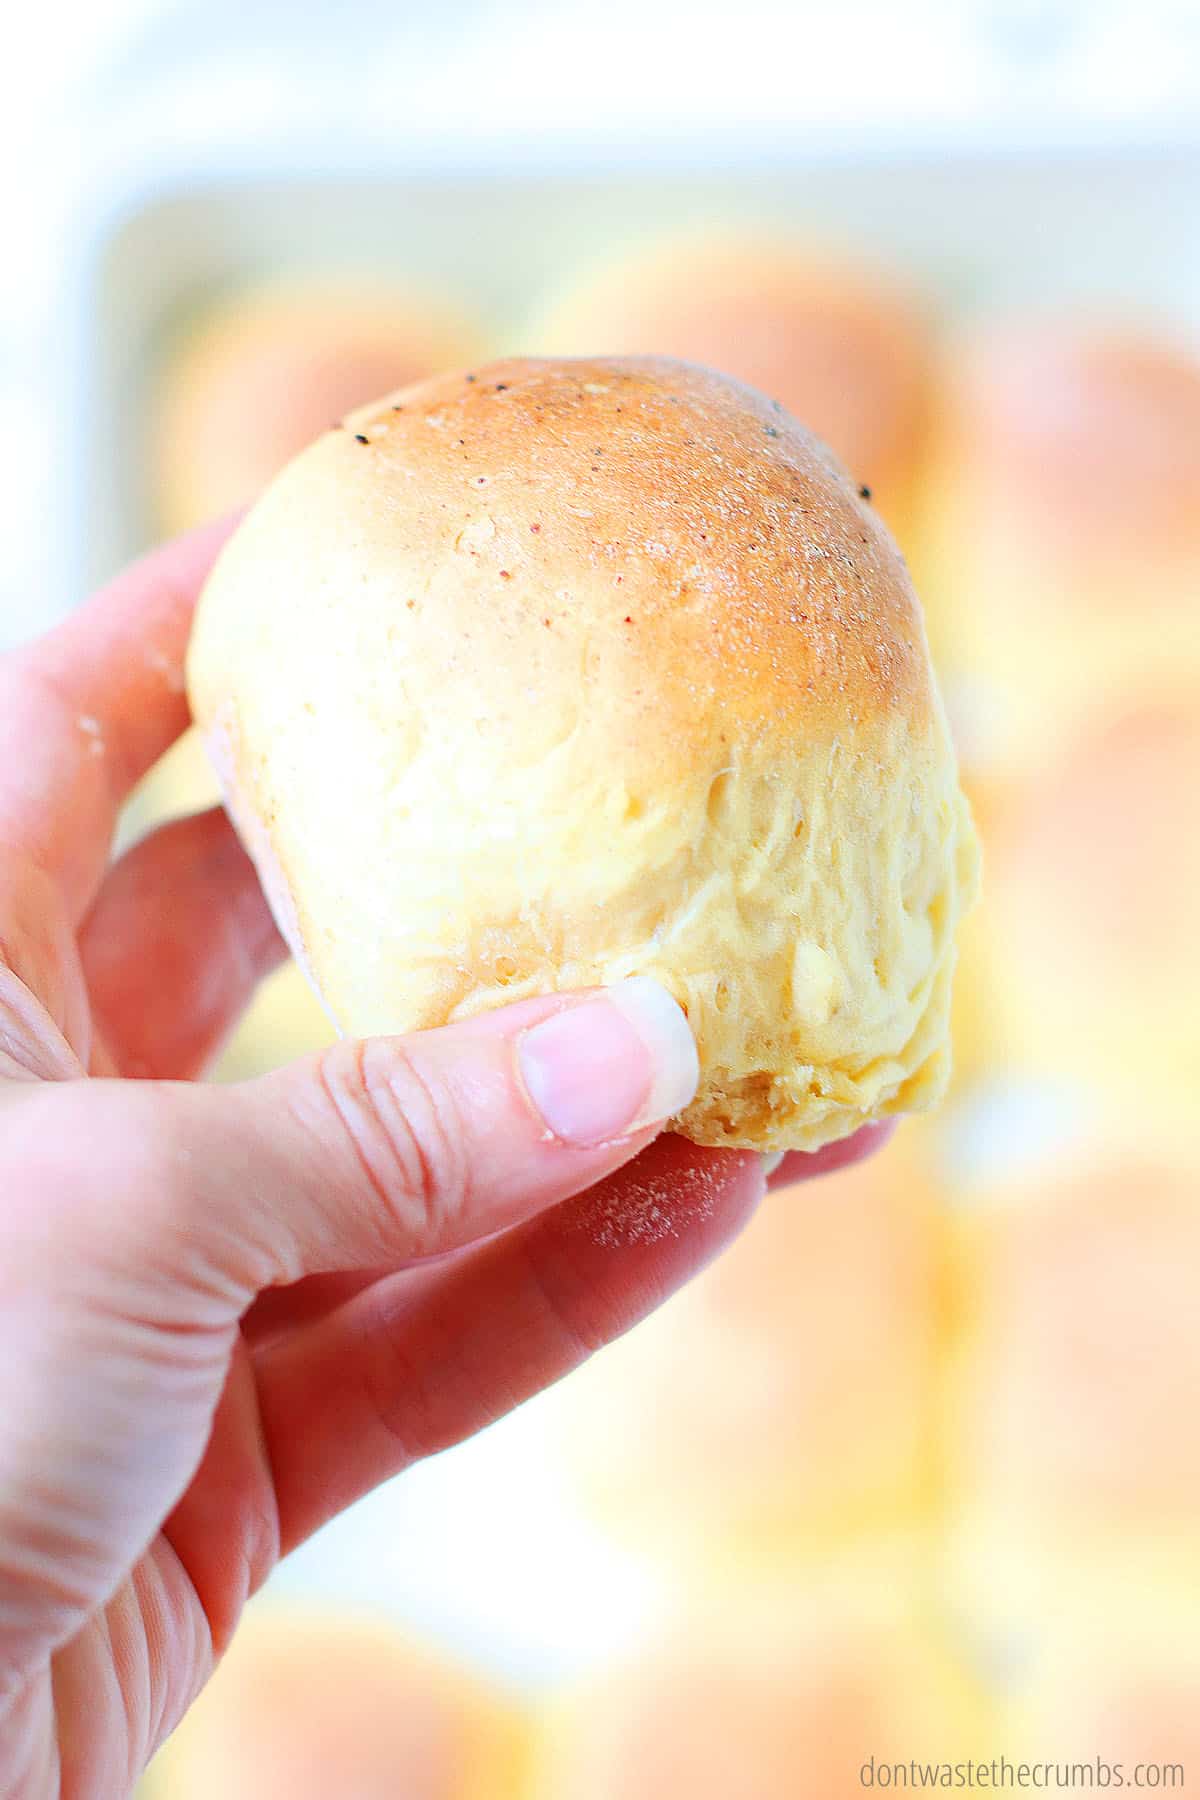 Try making some simple, light and fluffy einkorn dinner rolls, next time rolls are on your meal plan.